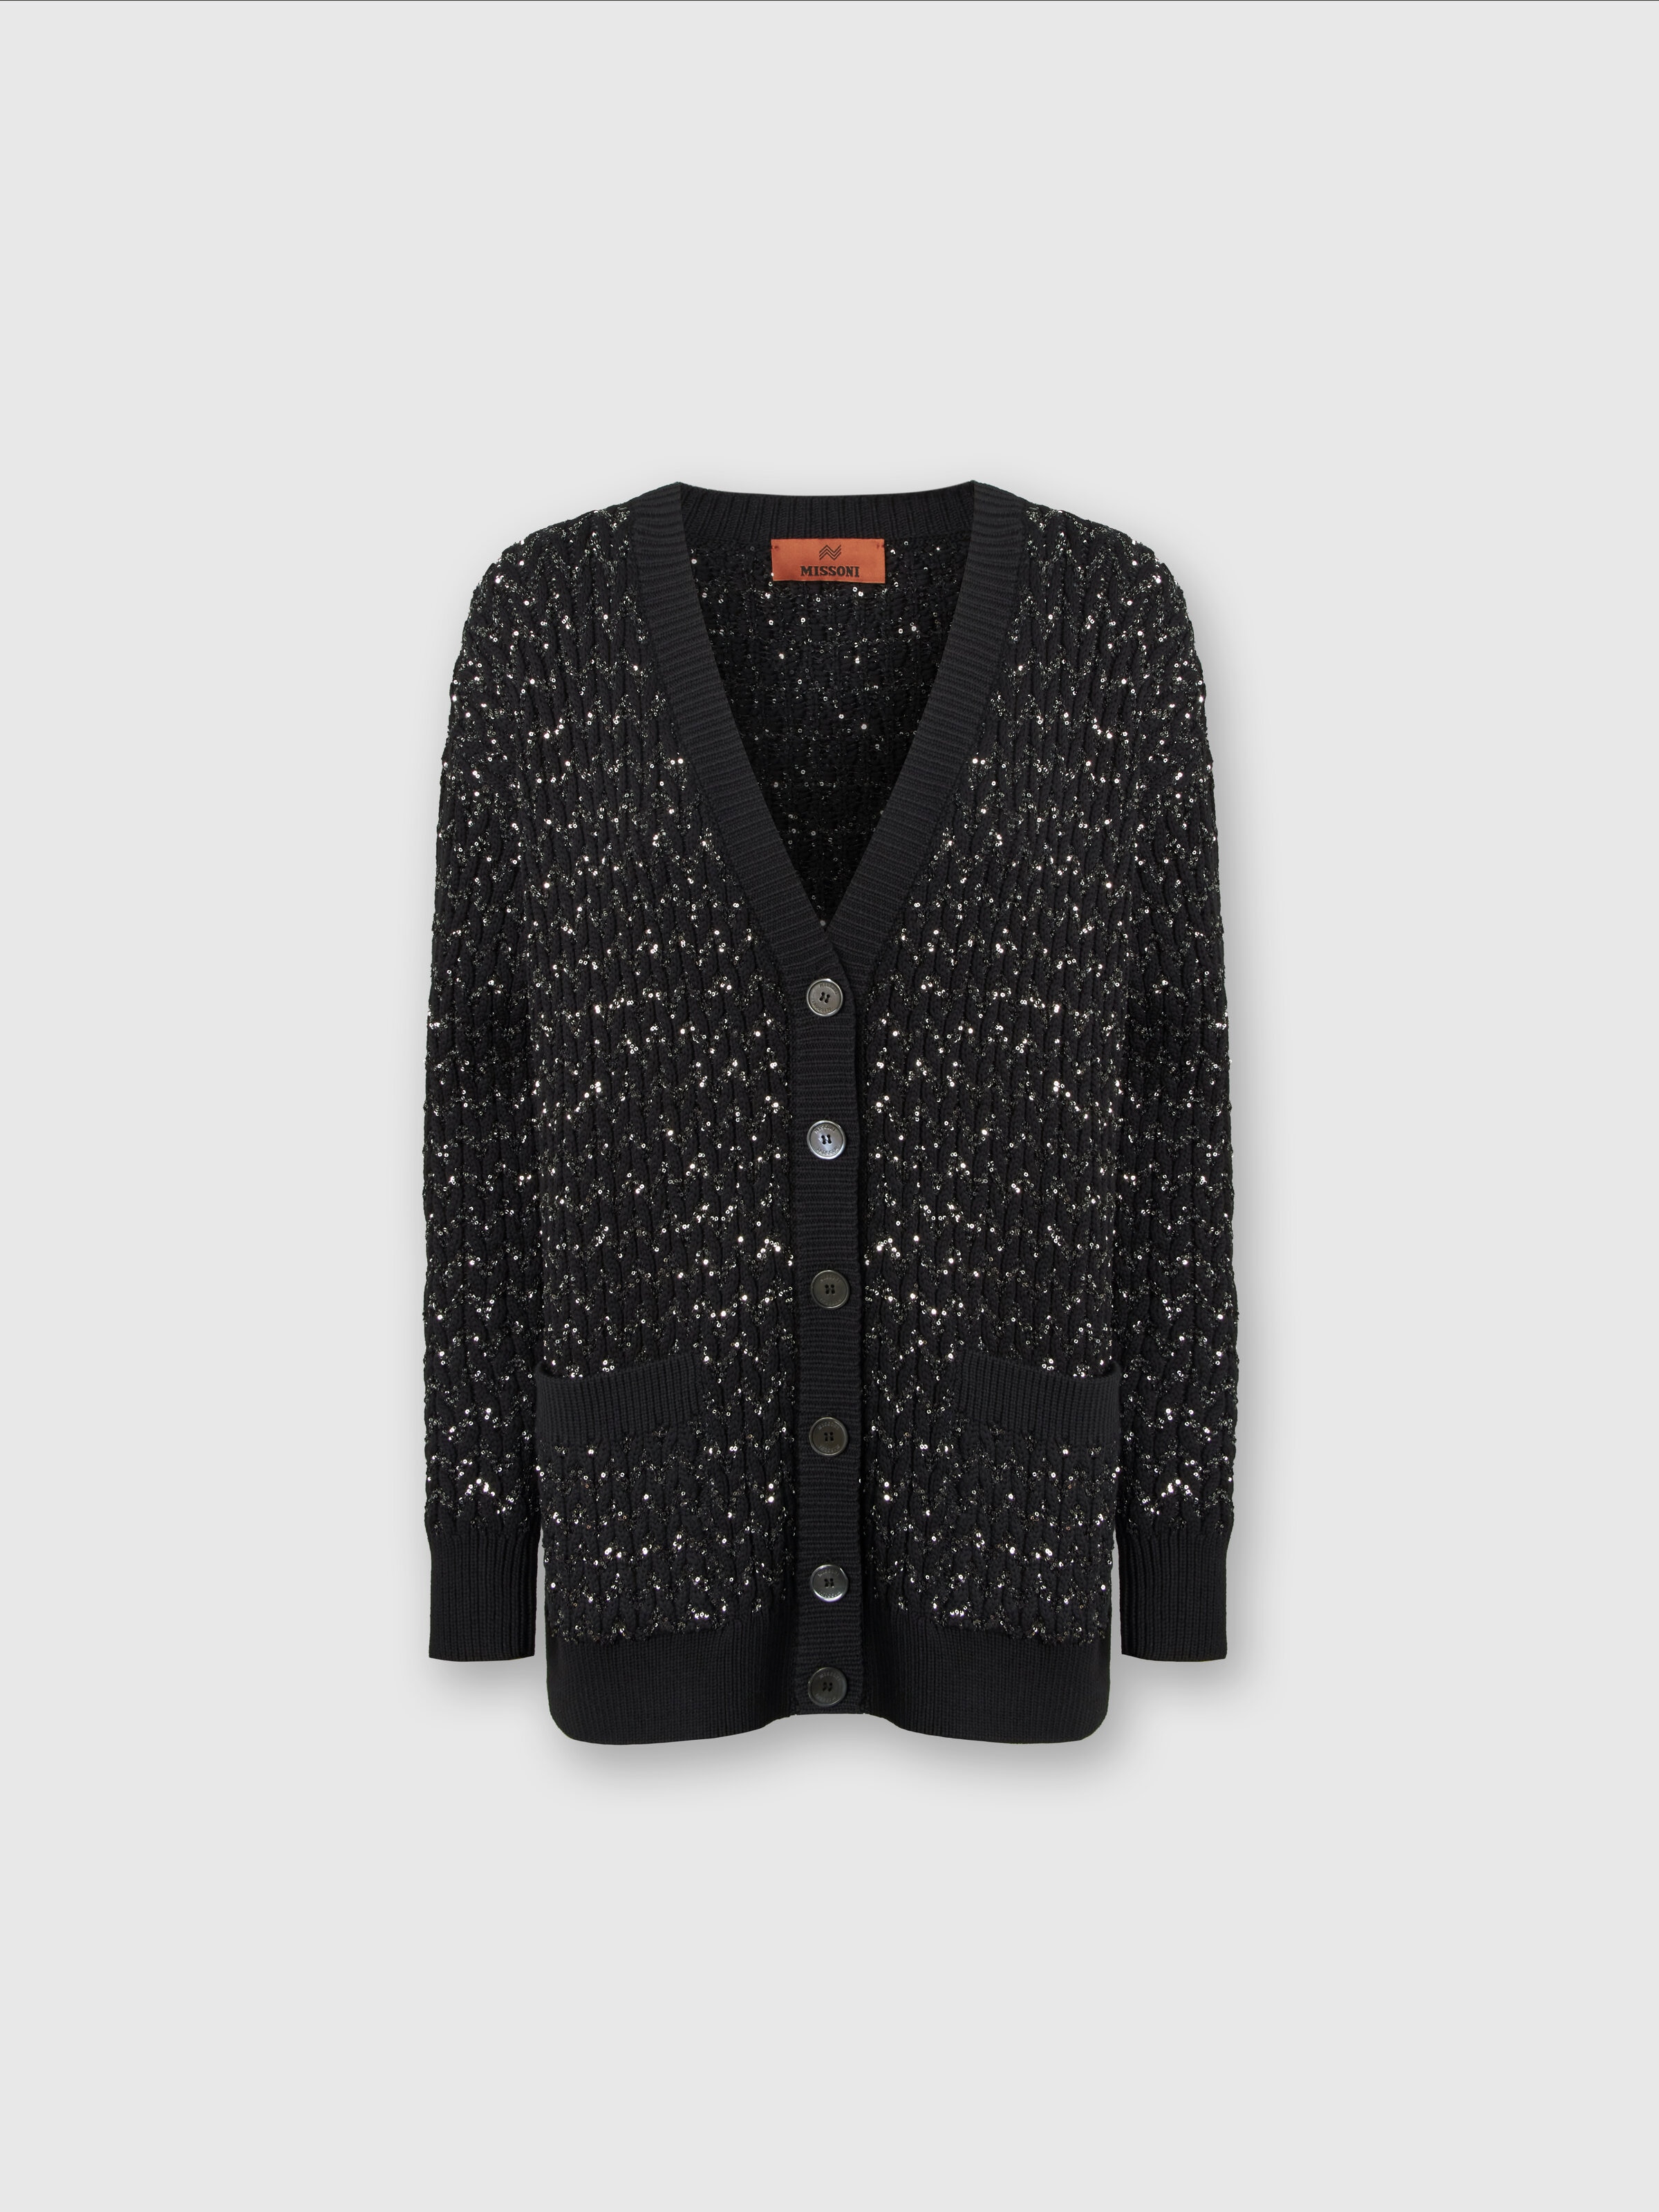 Oversized cardigan in knit with braiding and sequins, Black    - 0